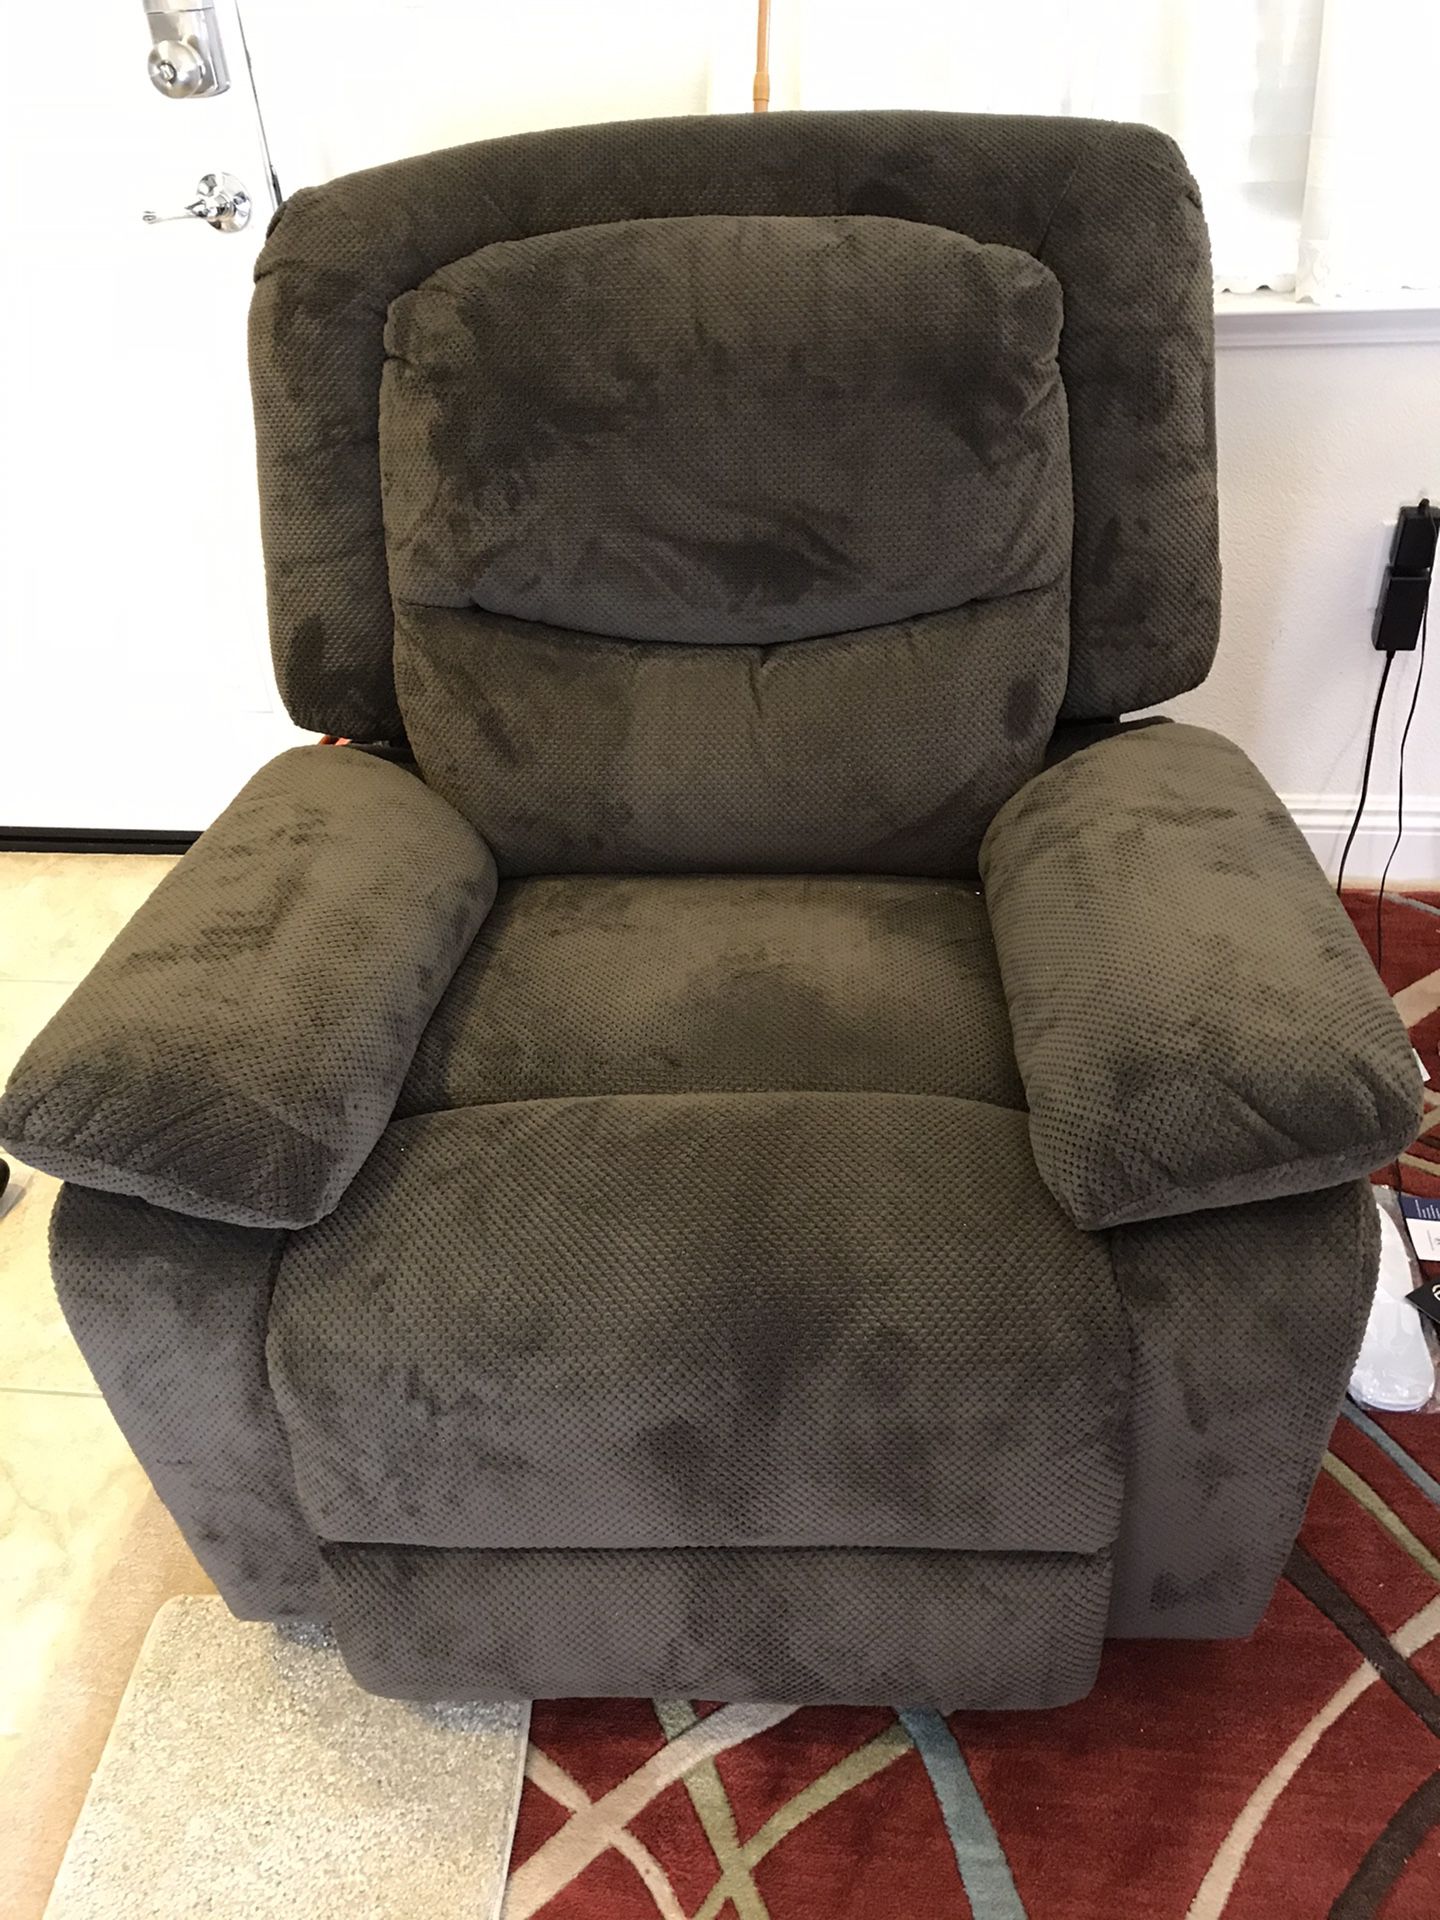 Recliner $180 - Fully recline, POWER operate & Comfy